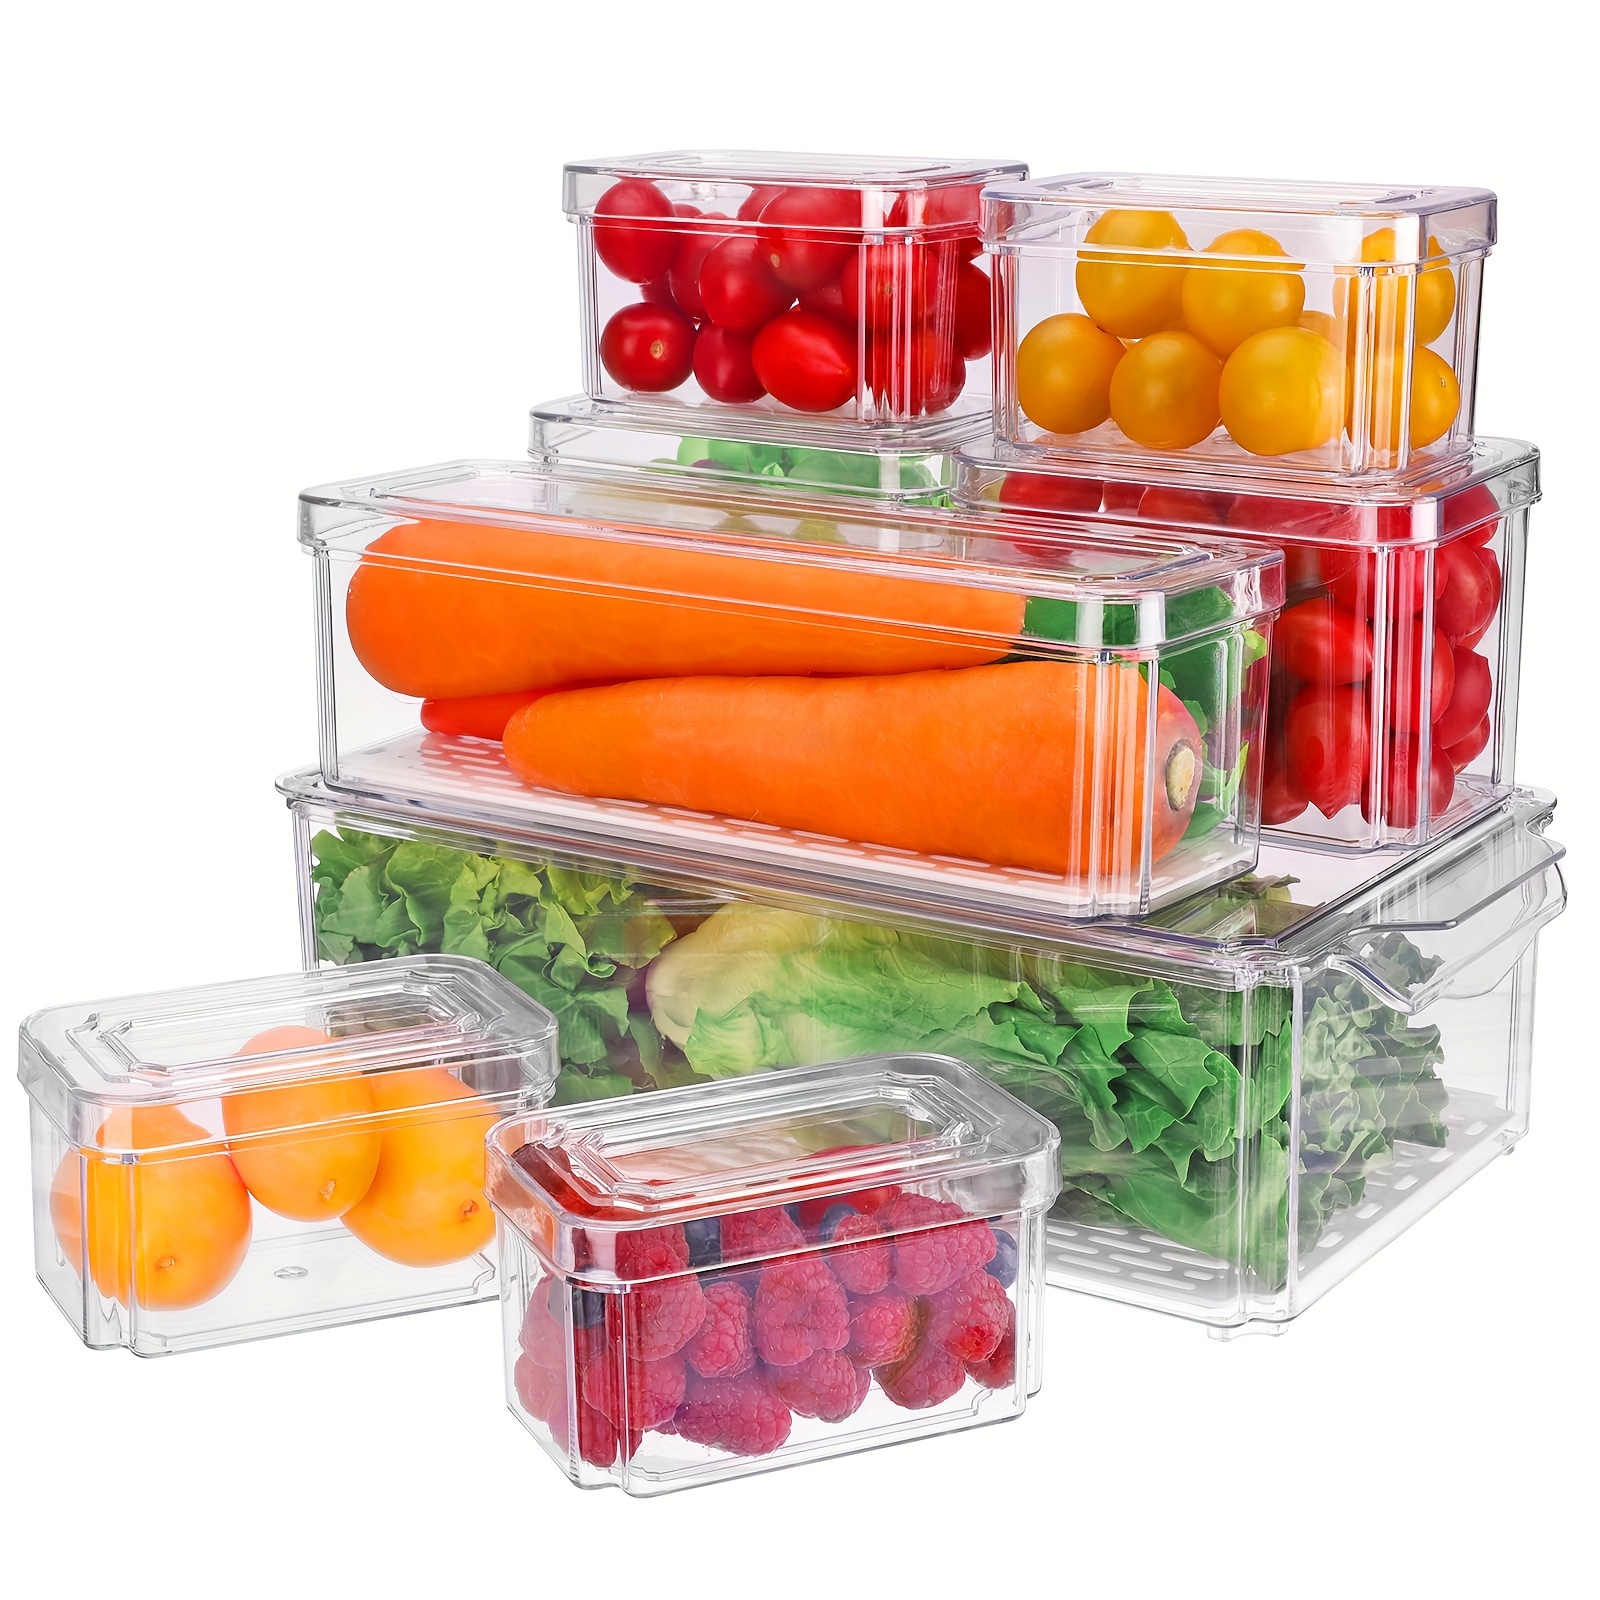 Cheer US 2 Grid Reusable Plastic Food Storage Containers with Lids, Refrigerator Crisper Box Fresh Snacks Fruit Storage Box for Produce,  Fruits, Vegetables, Meat and Fish 